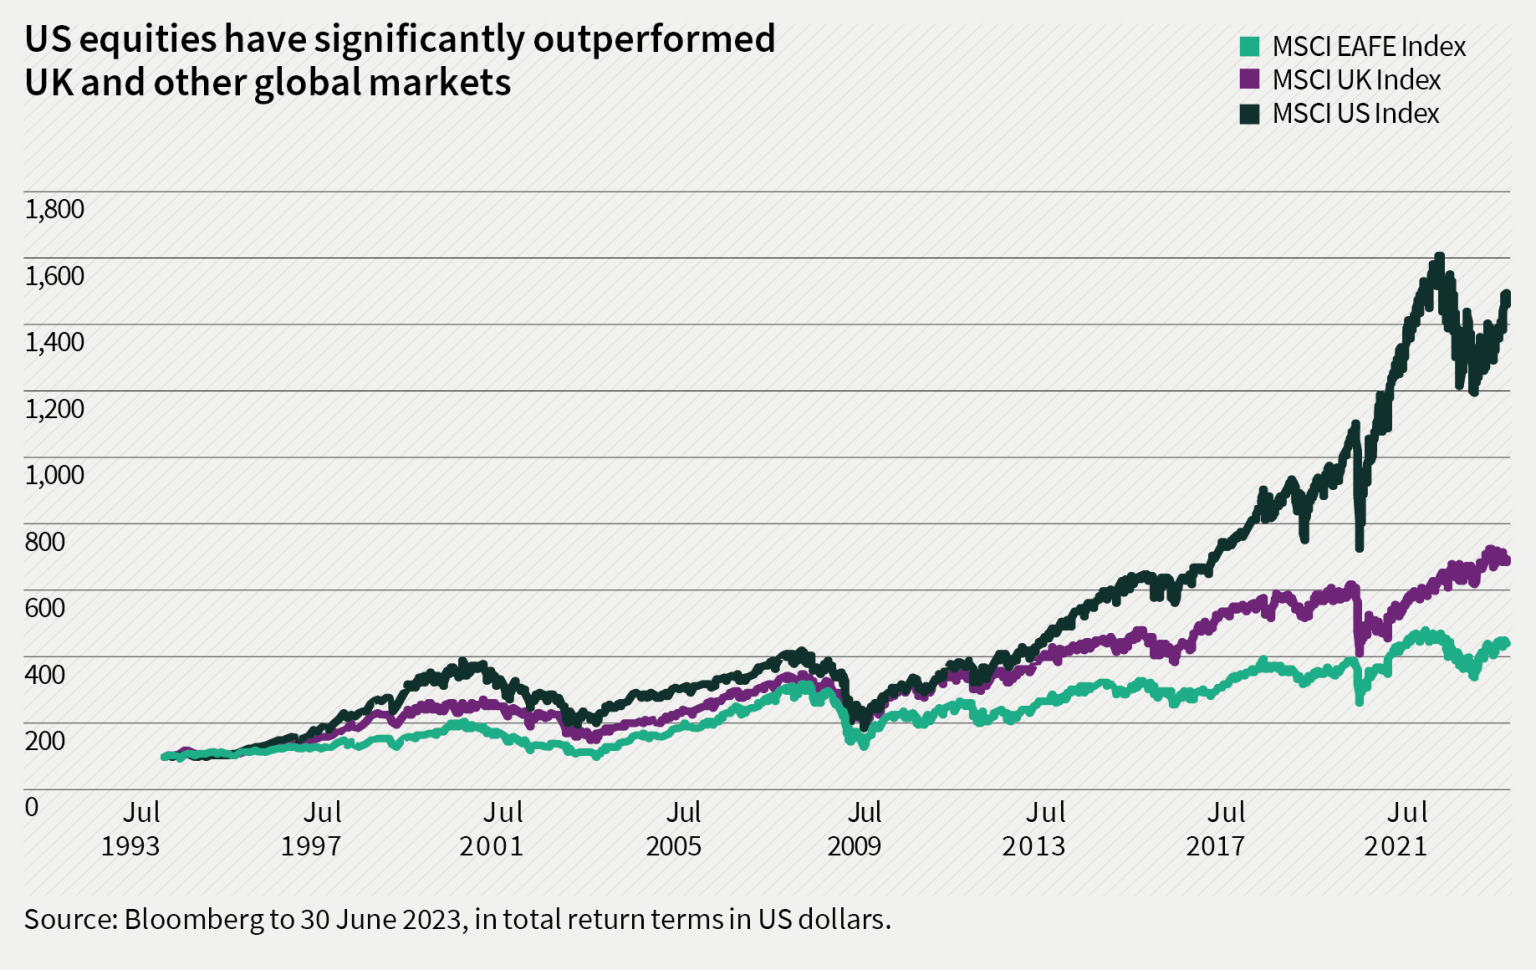 US equities have significantly outperformed UK and other global markets